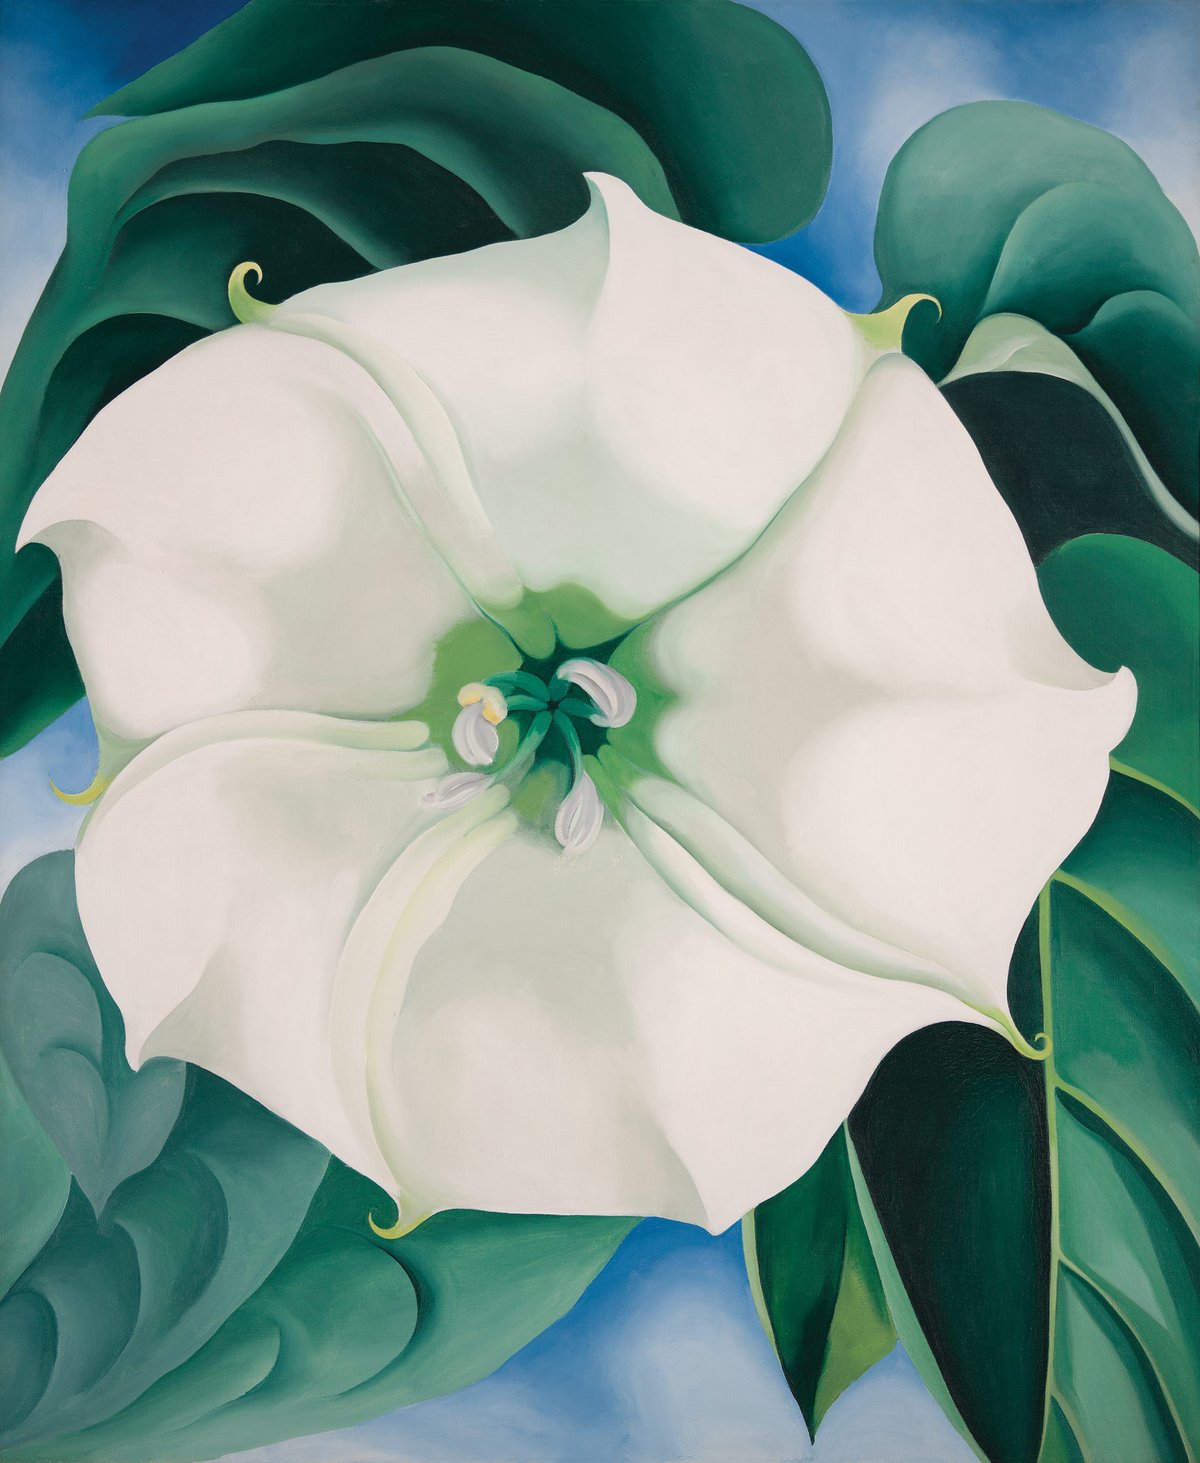 Georgia O’Keeffe 1887-1986 Jimson Weed/White Flower No. 1 1932 Oil paint on canvas 48 x 40 inches Crystal Bridges Museum of American Art, Arkansas, USA © 2016 Georgia O'Keeffe Museum/DACS, London  Photography by Edward C. Robison III